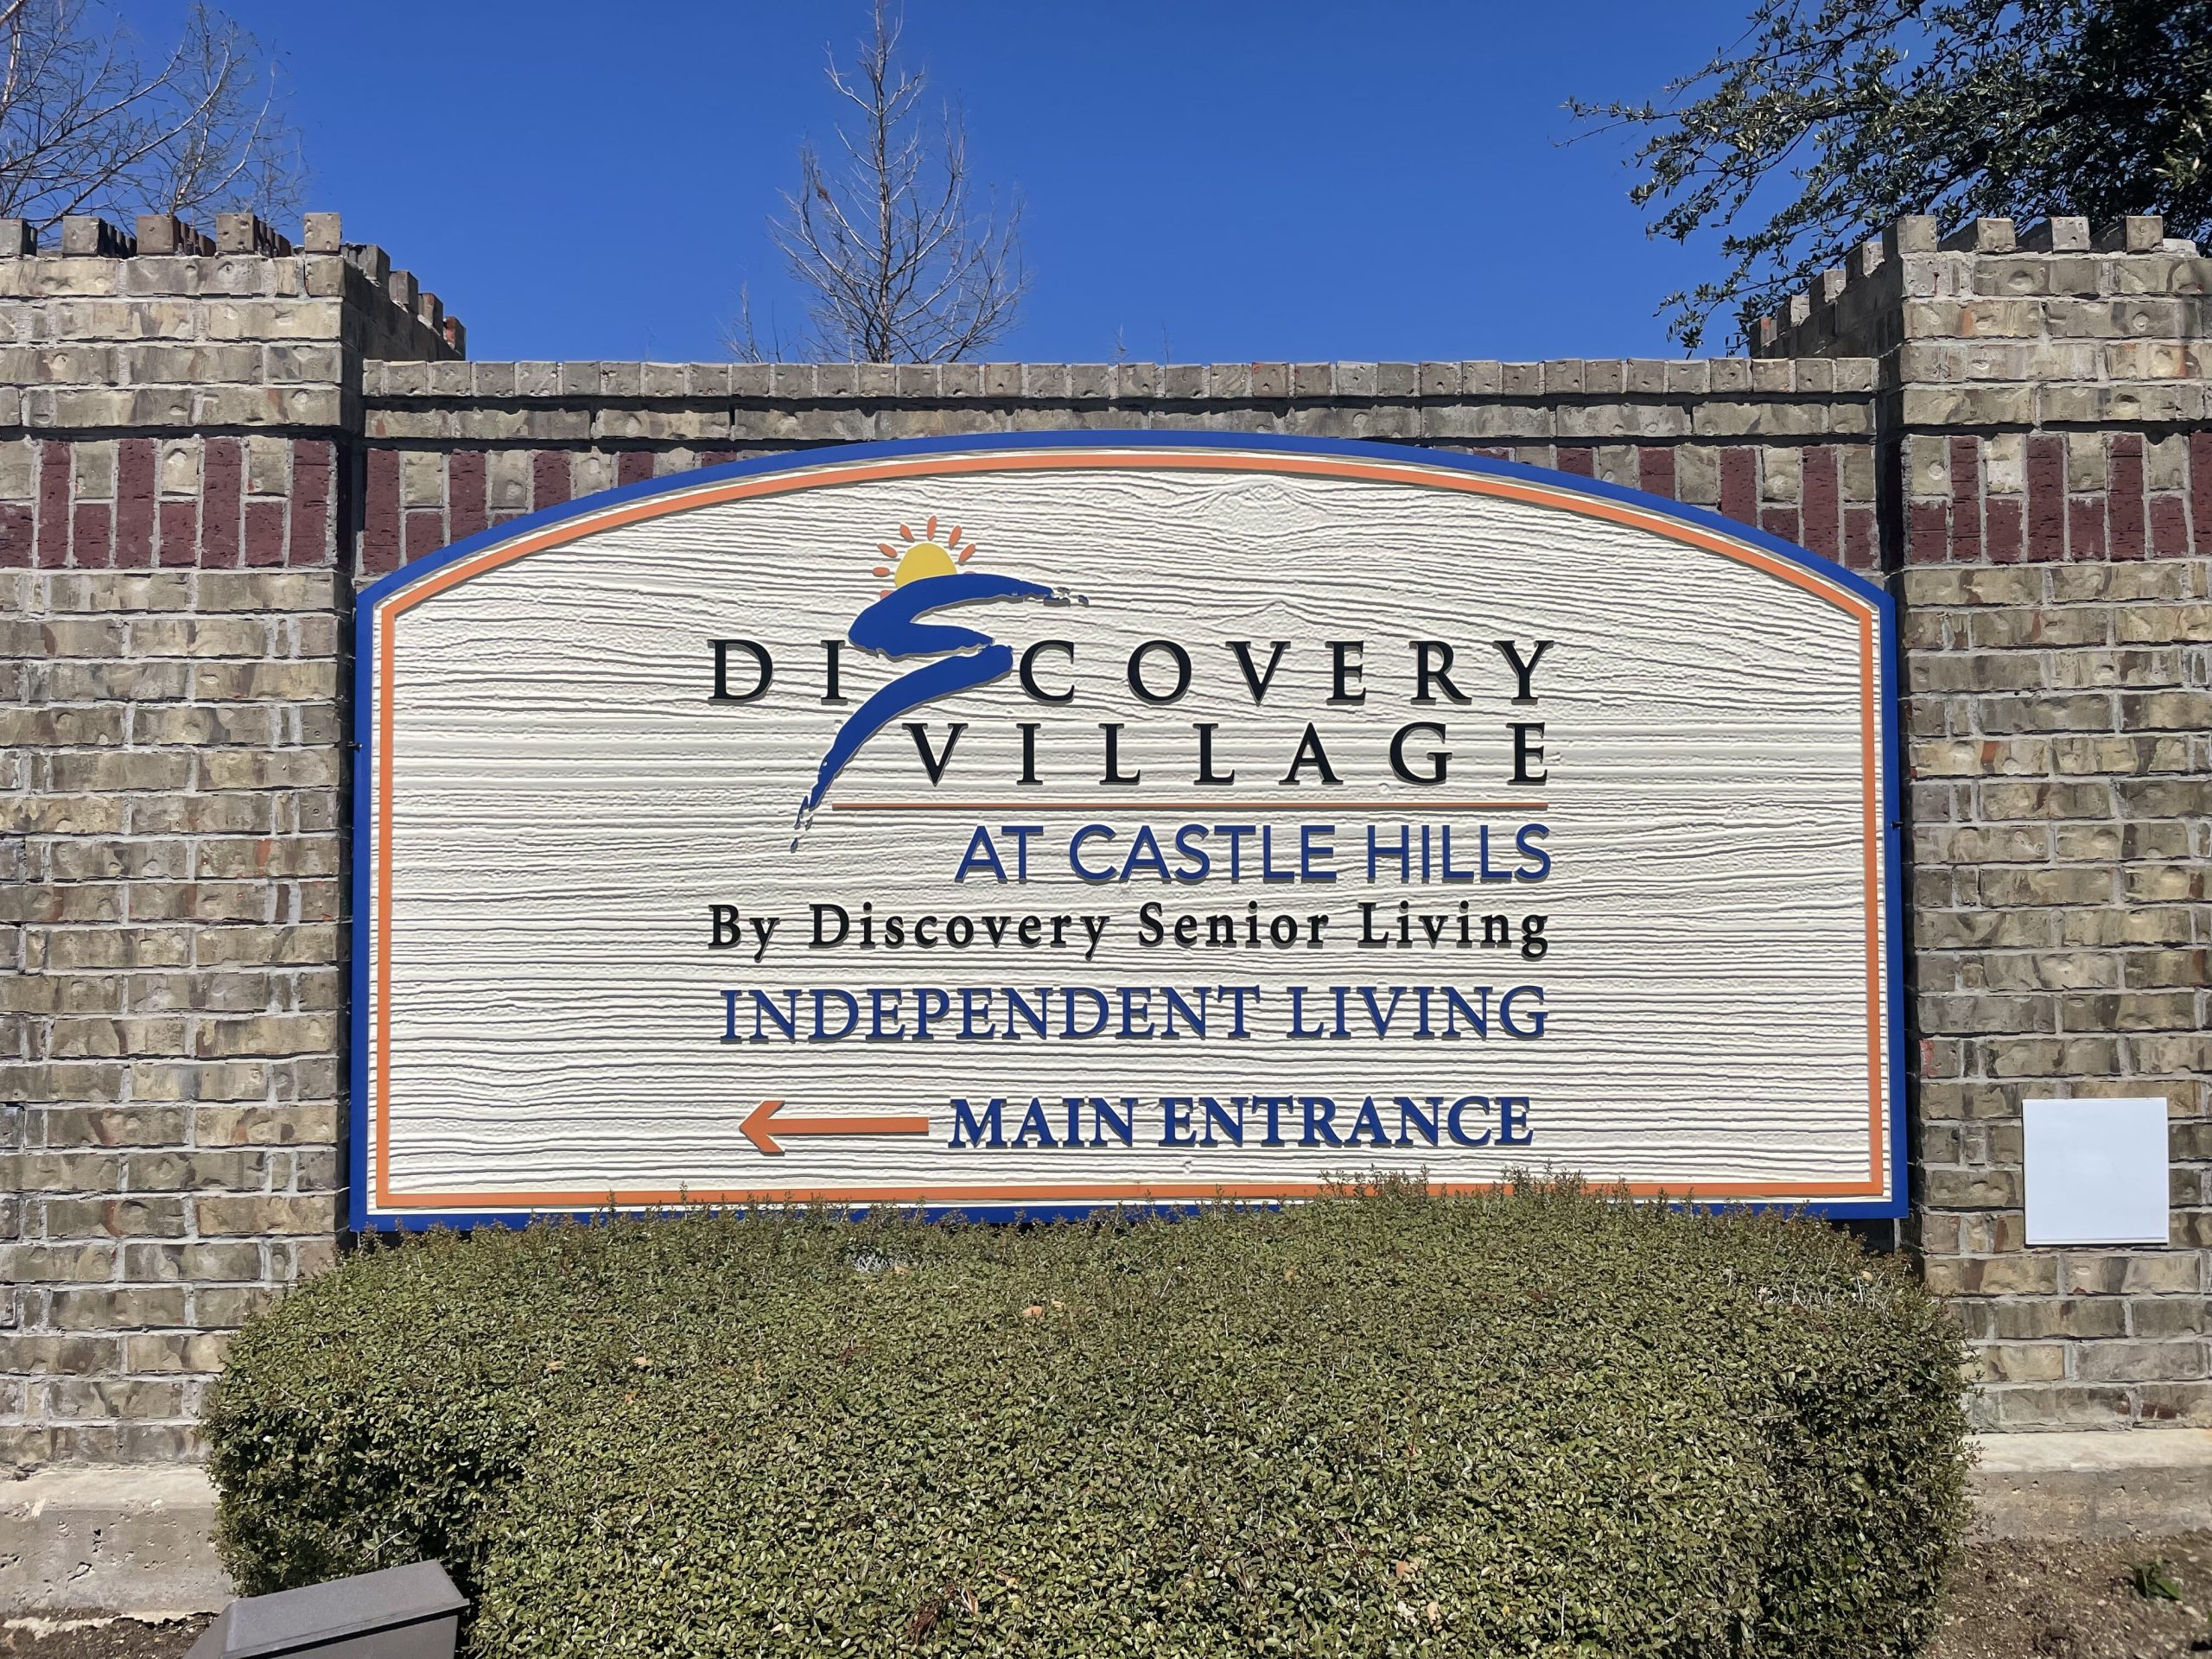 Exterior monument sign of Discovery Village